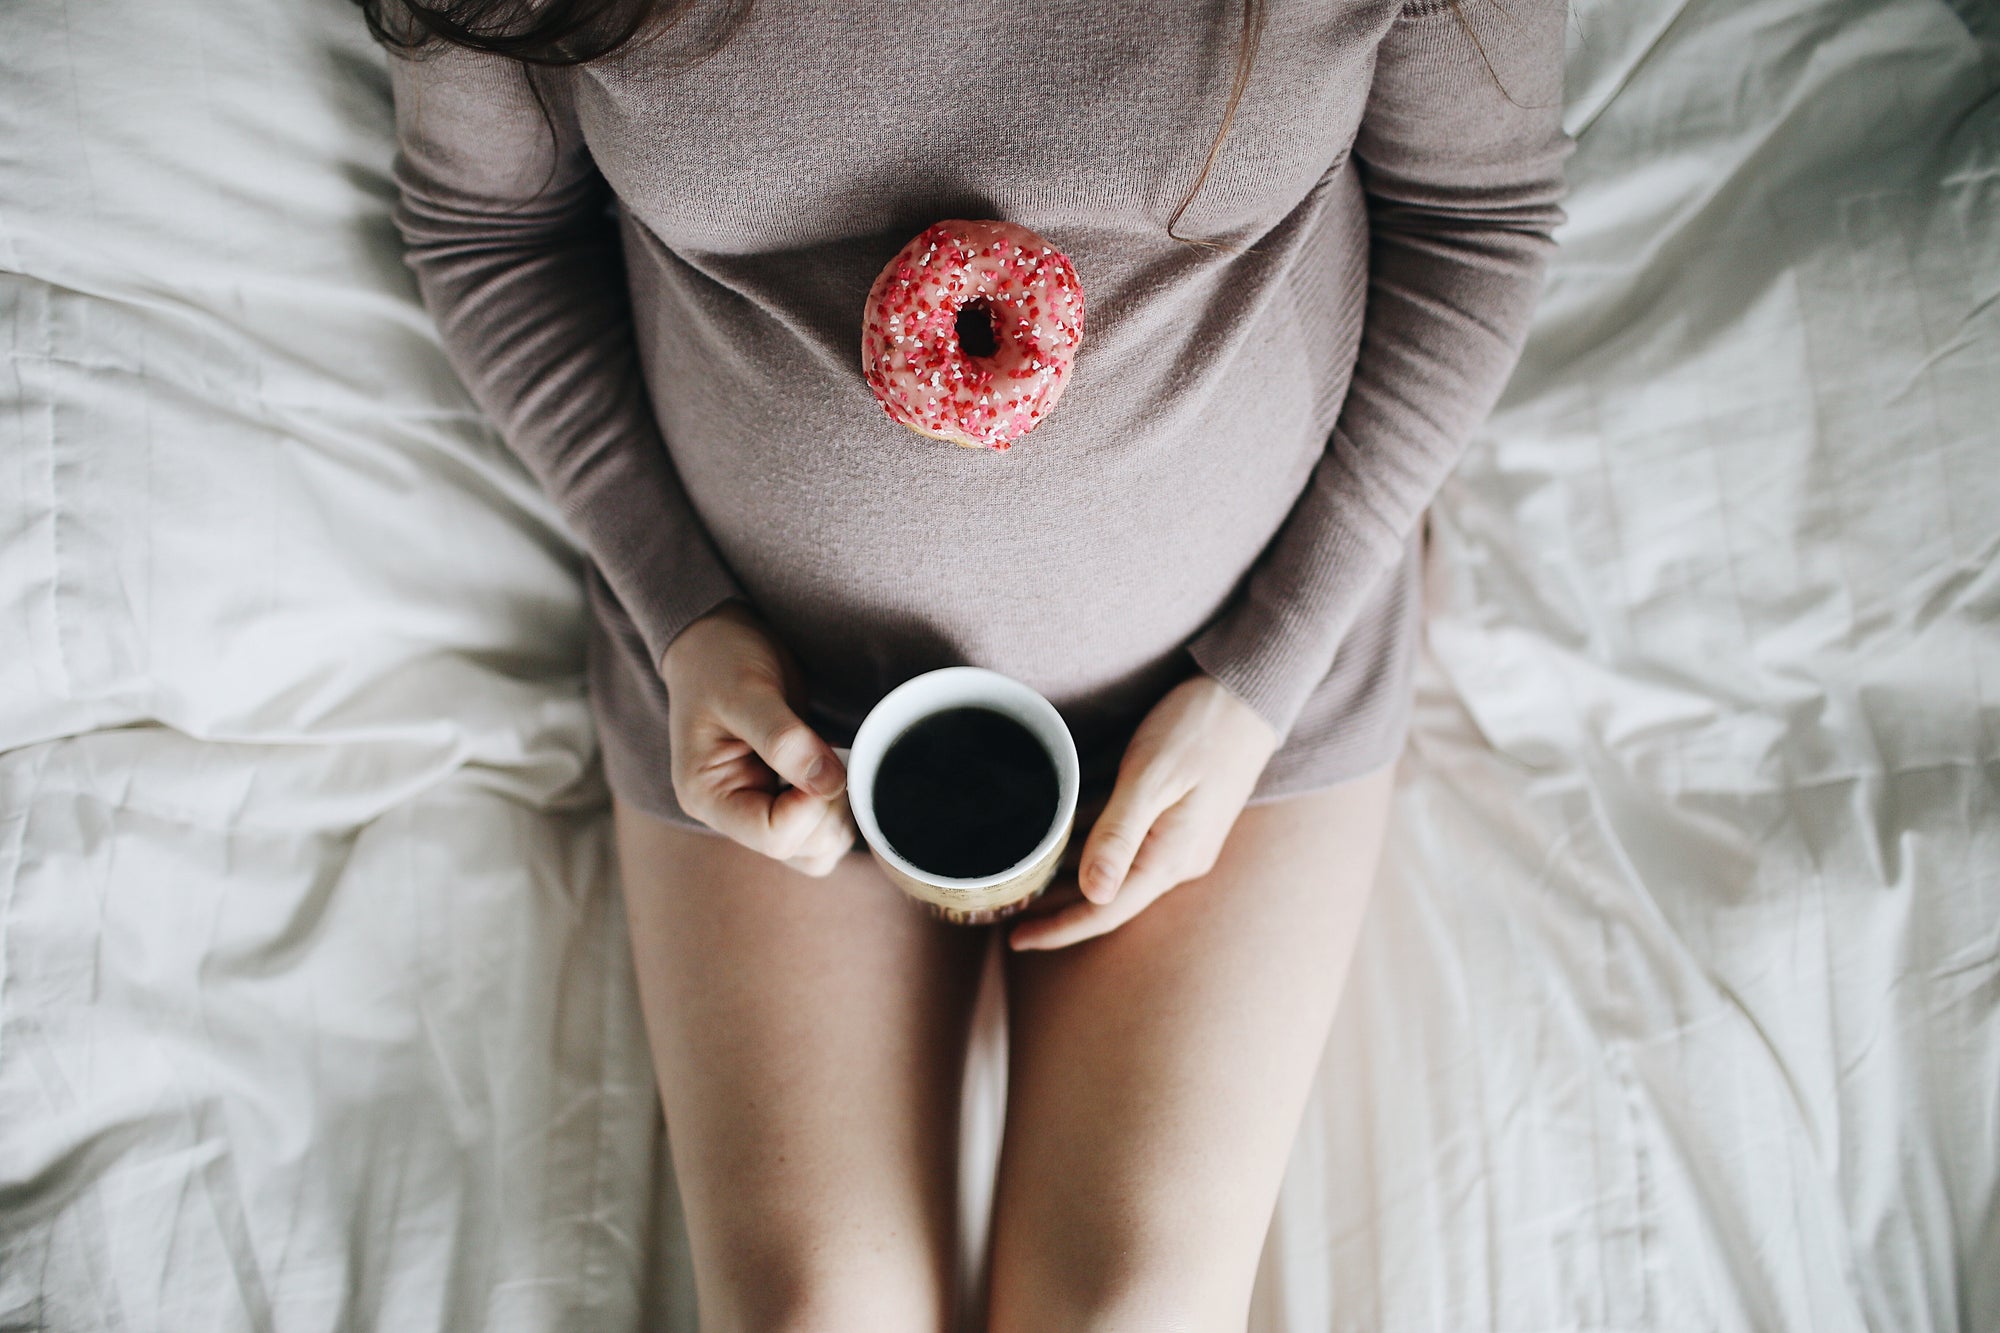 Pregnant woman resting with a coffee with a doughnut on her baby bump